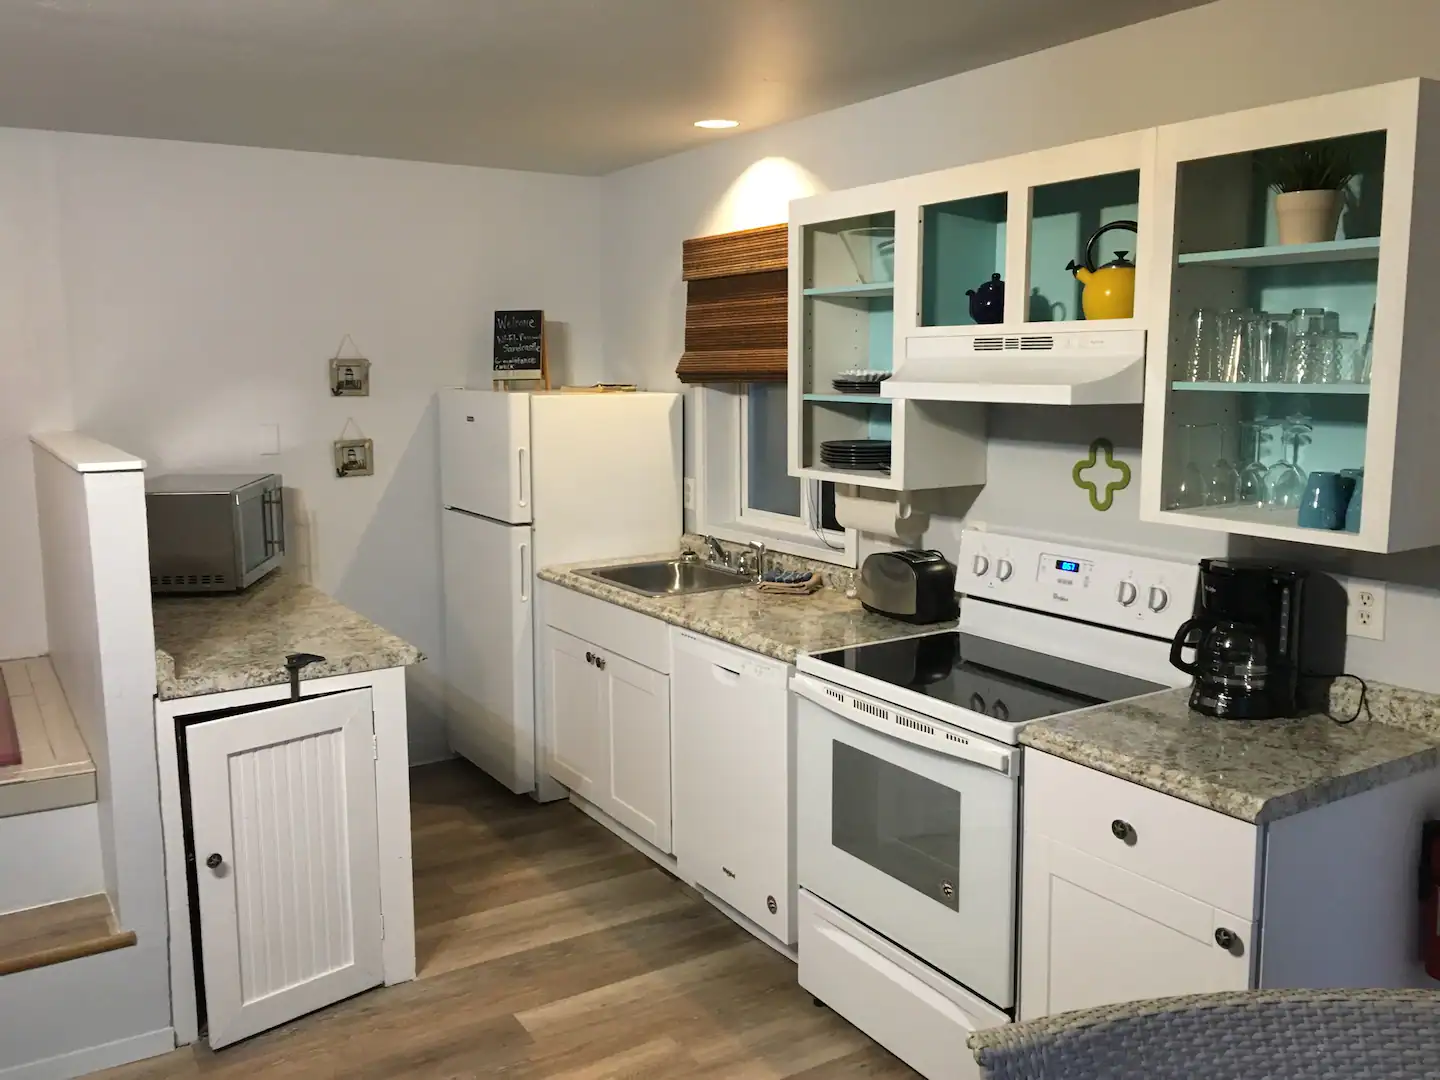 View of the kitchen inside The Lighthouse beach home